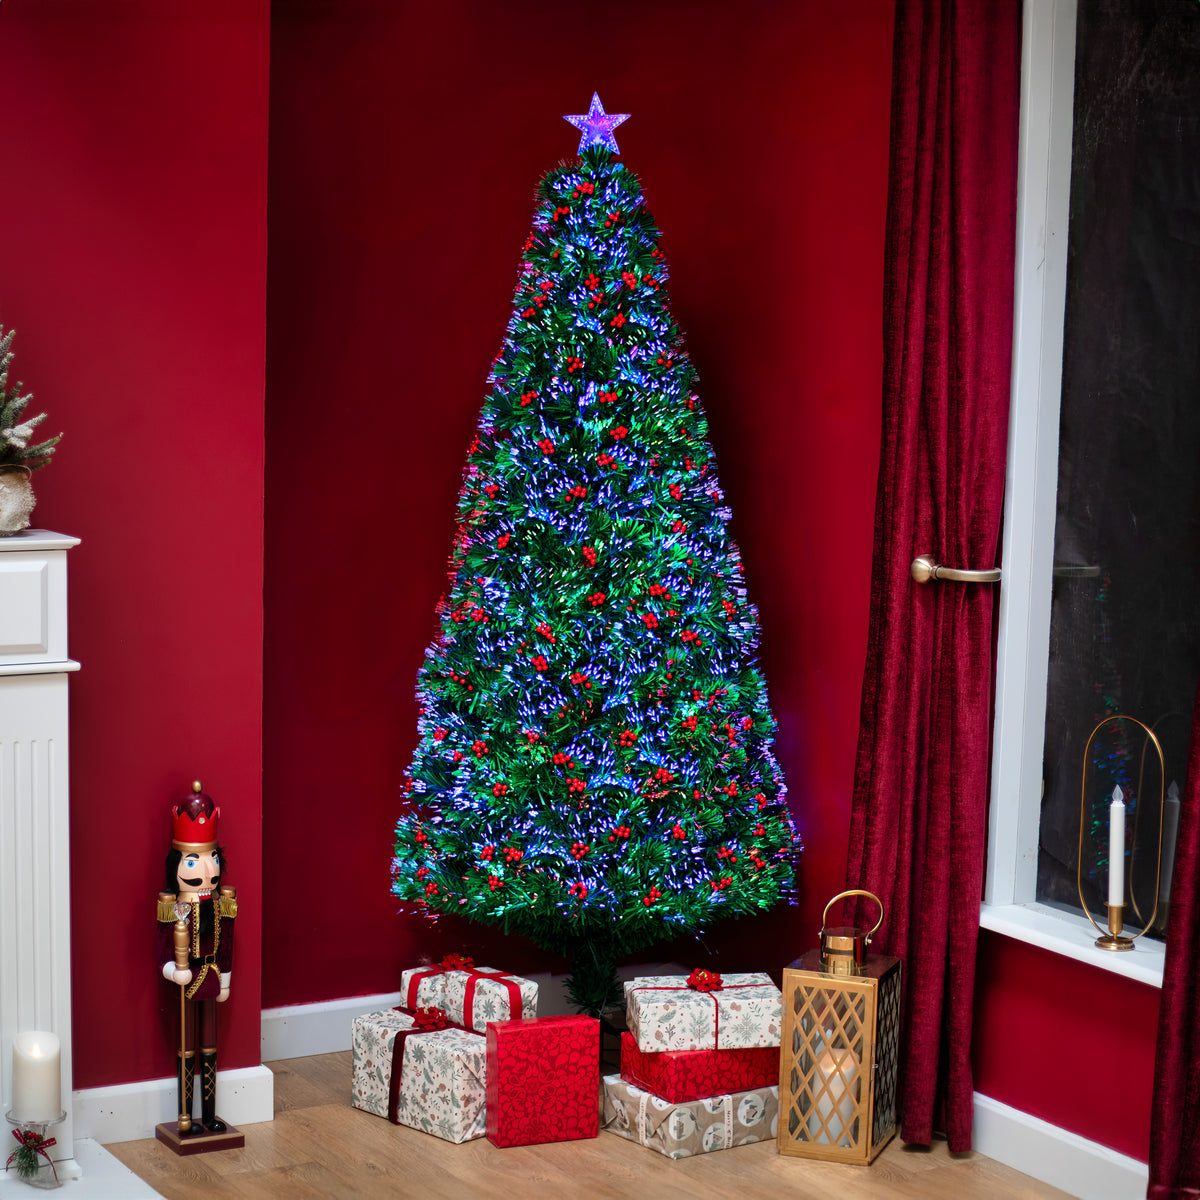 2ft - 7ft Green Fibre Optic Christmas Tree with Multi Coloured Fibre Optic Lights and Red Berries